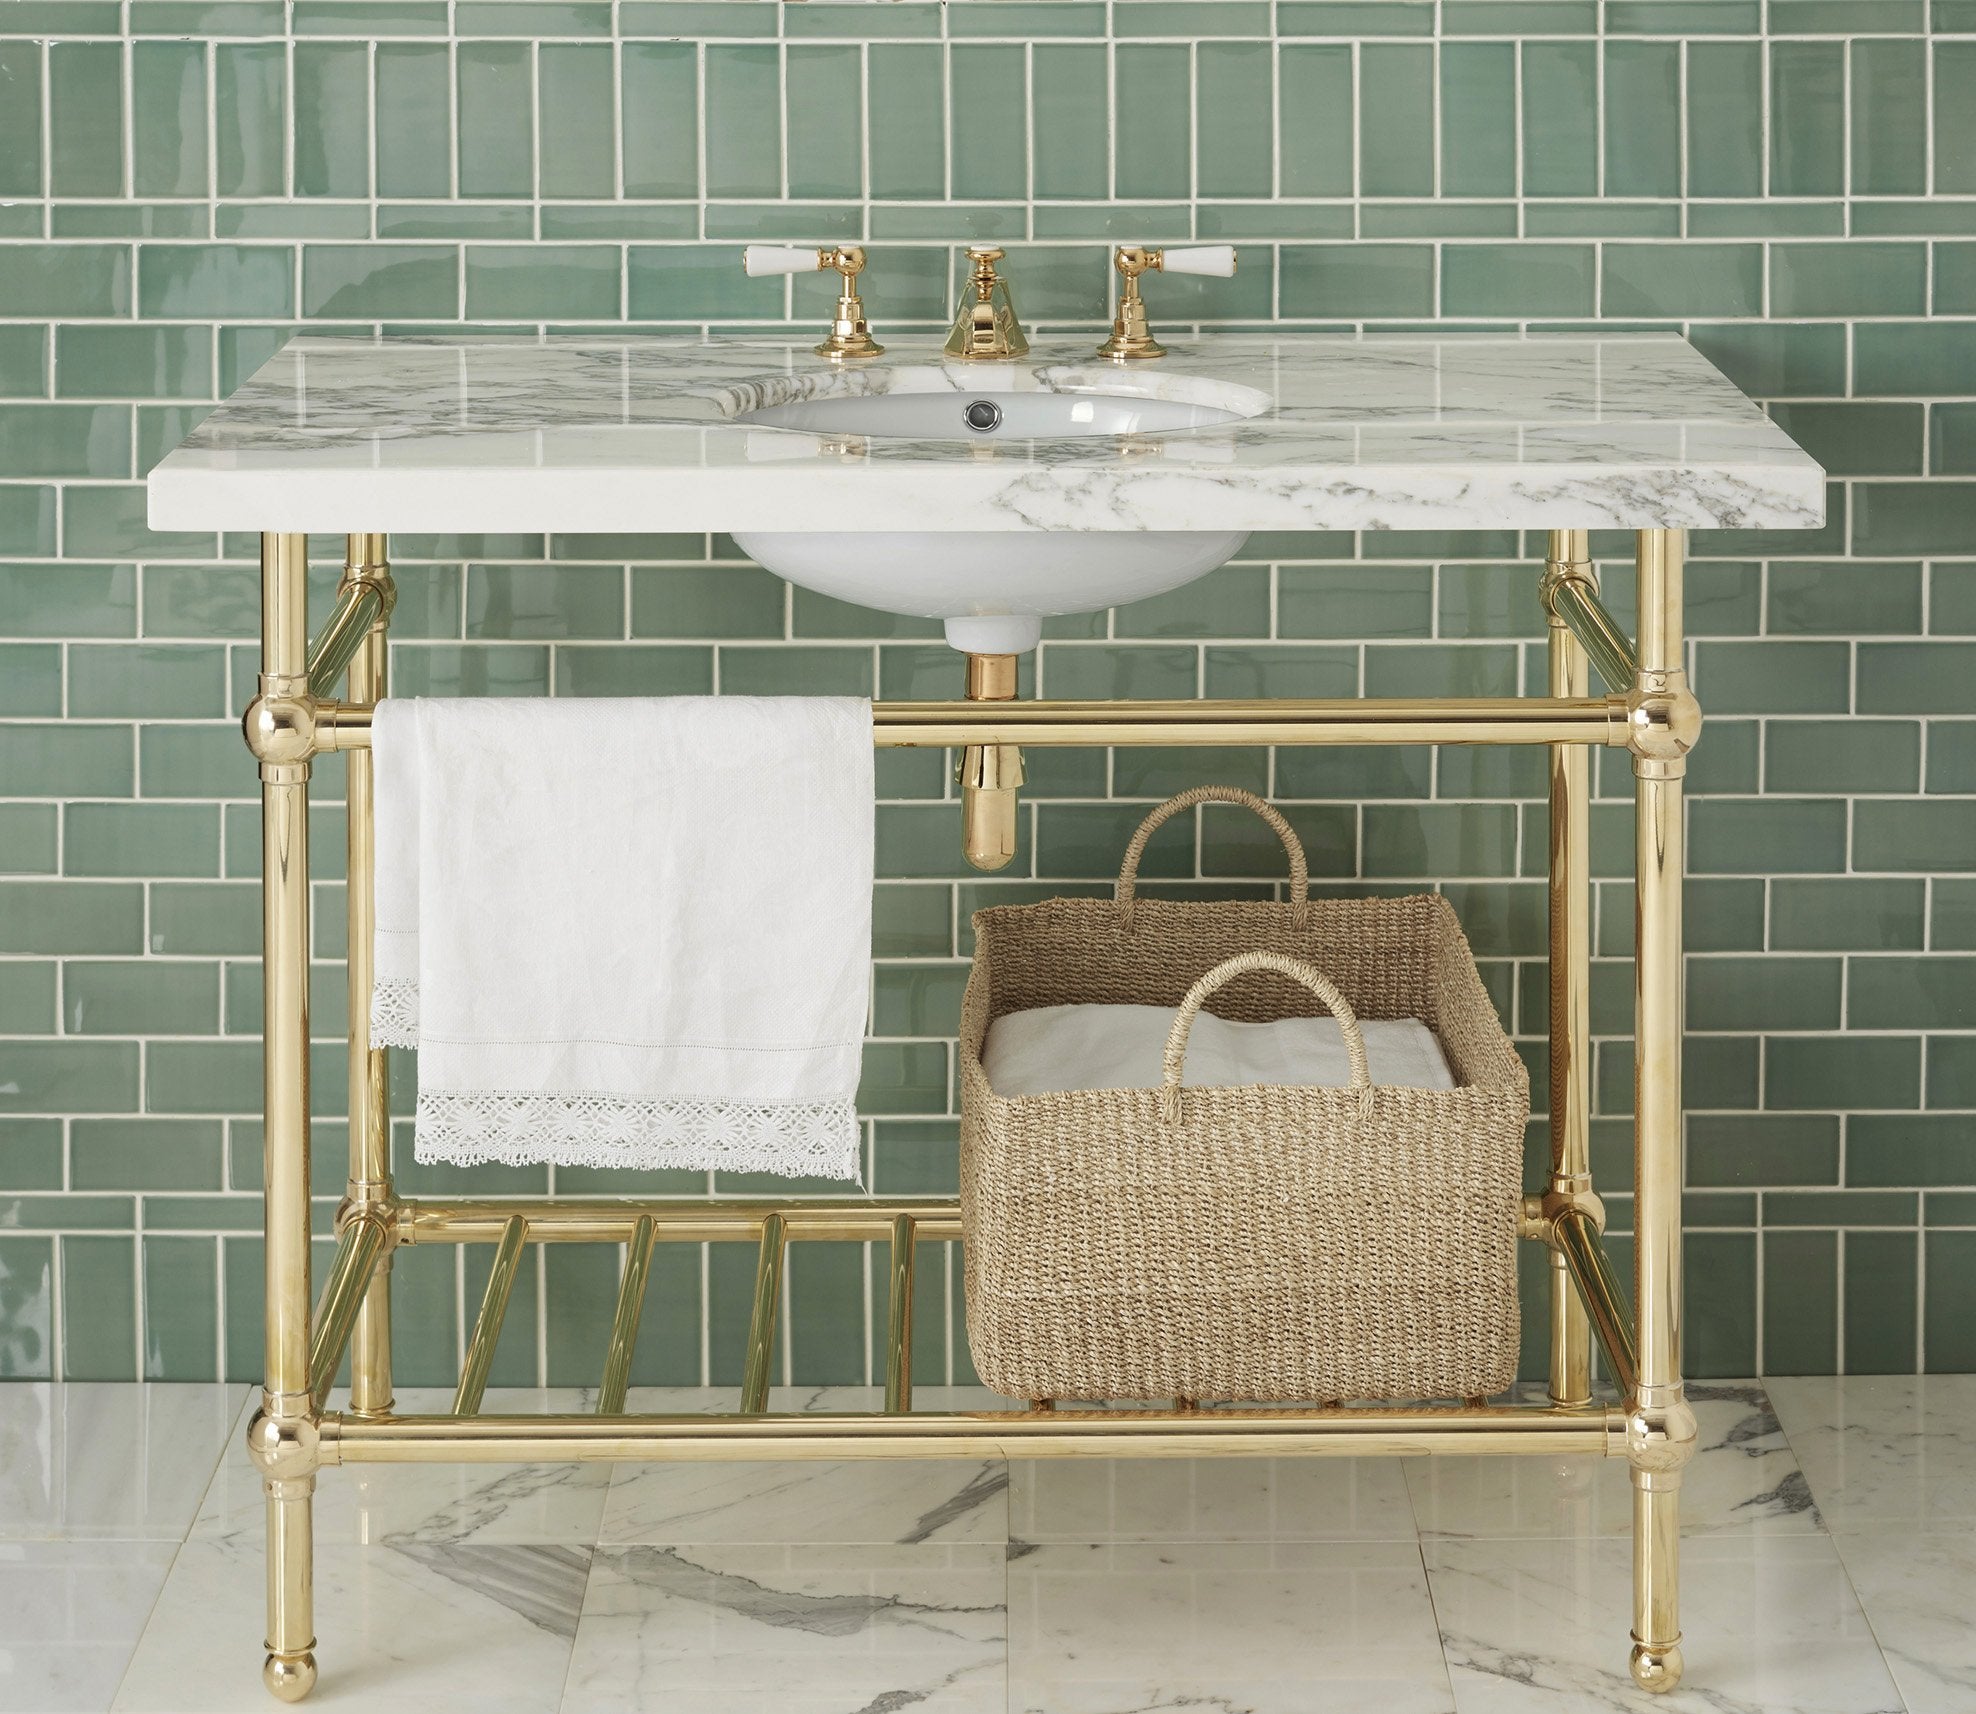 Gotham Washstand with Metal Shelf Extra Wide Single Product Image 1